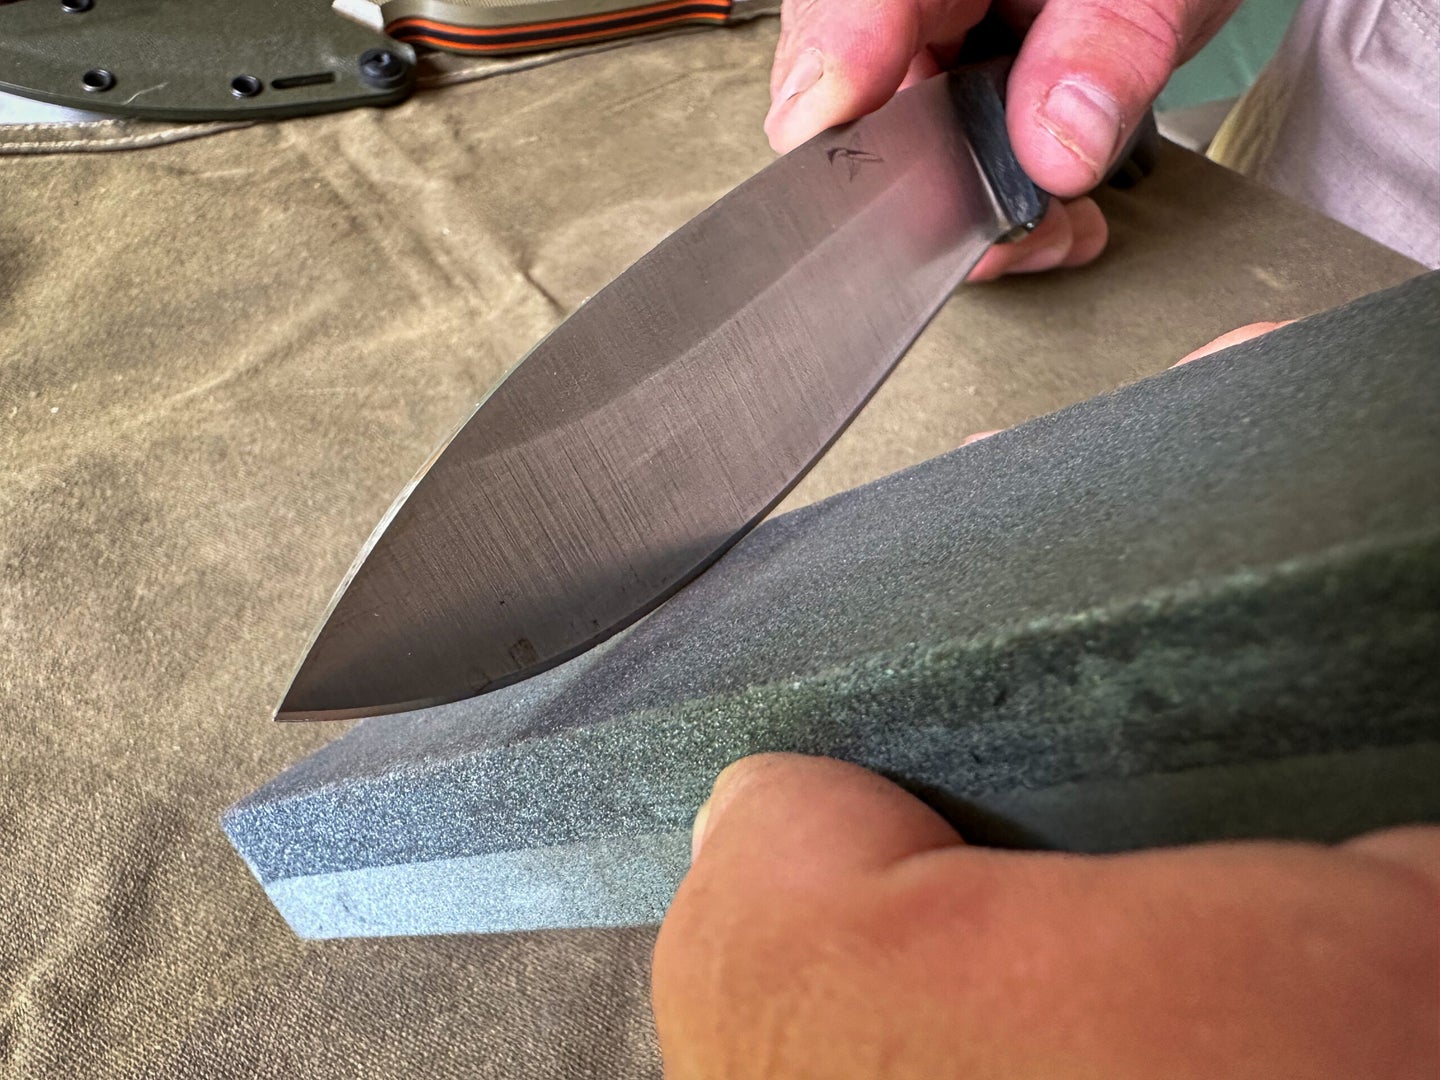 A man uses a stone to sharpen a knife